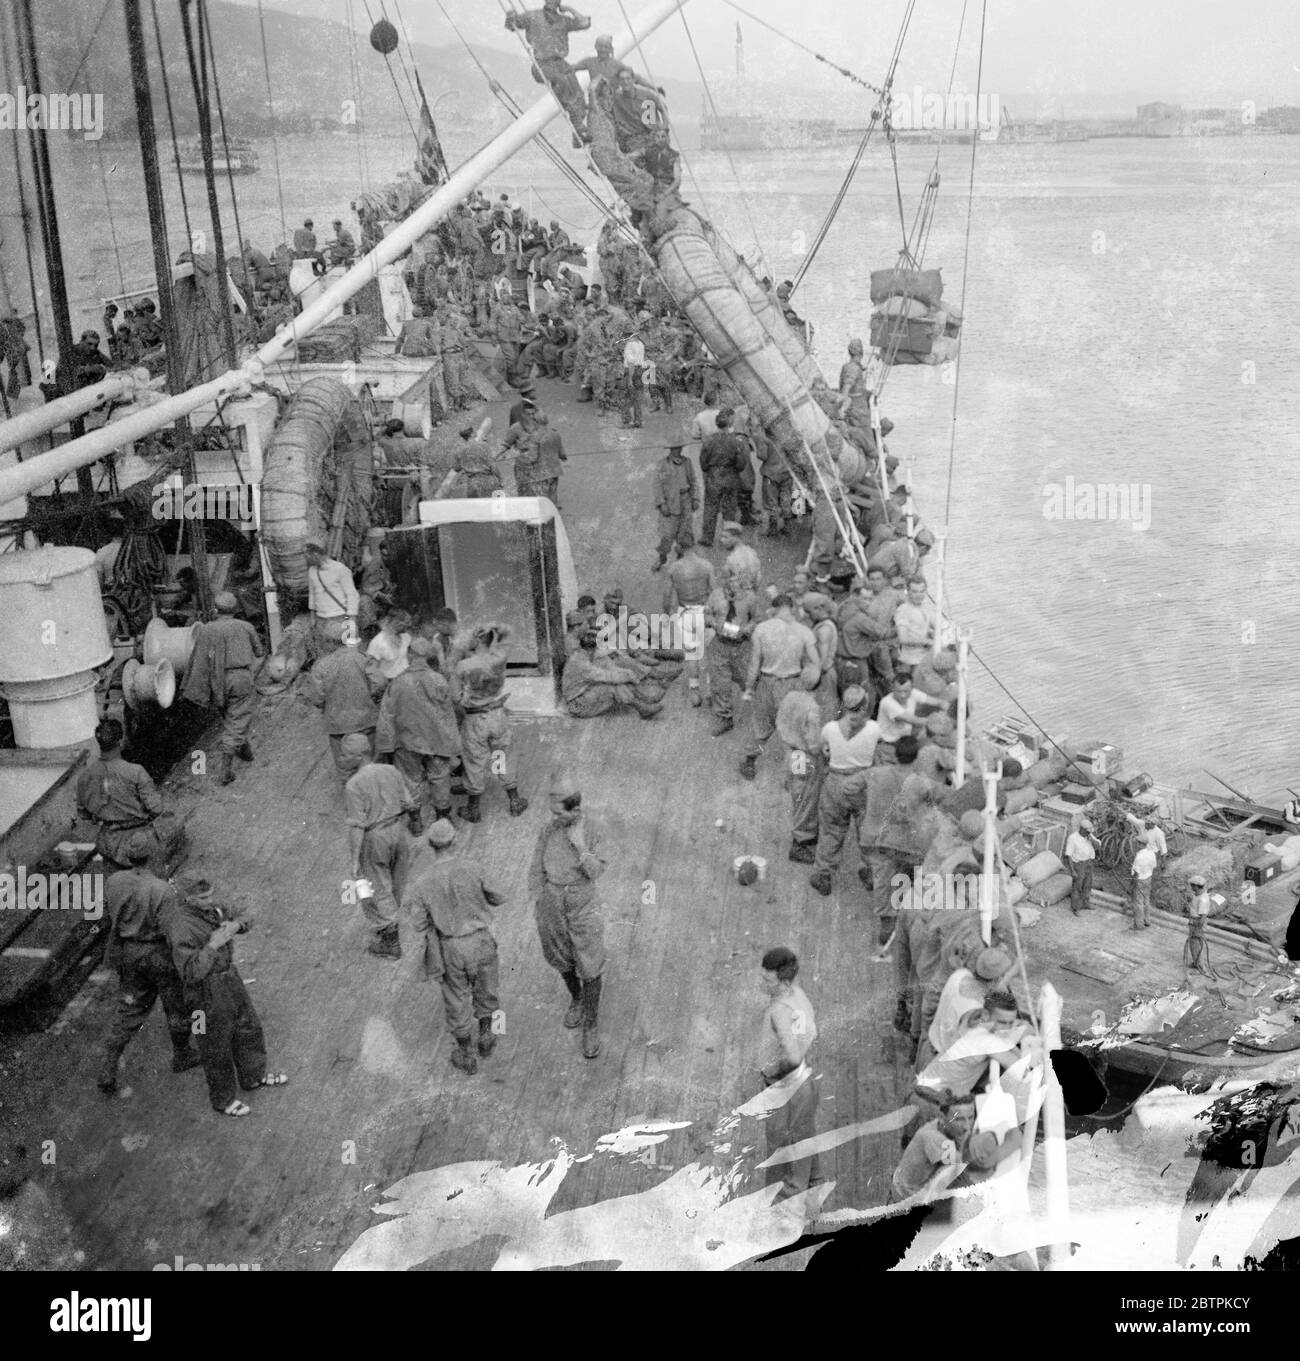 Troopship in port, possibly French. 15 November 1935 Stock Photo - Alamy